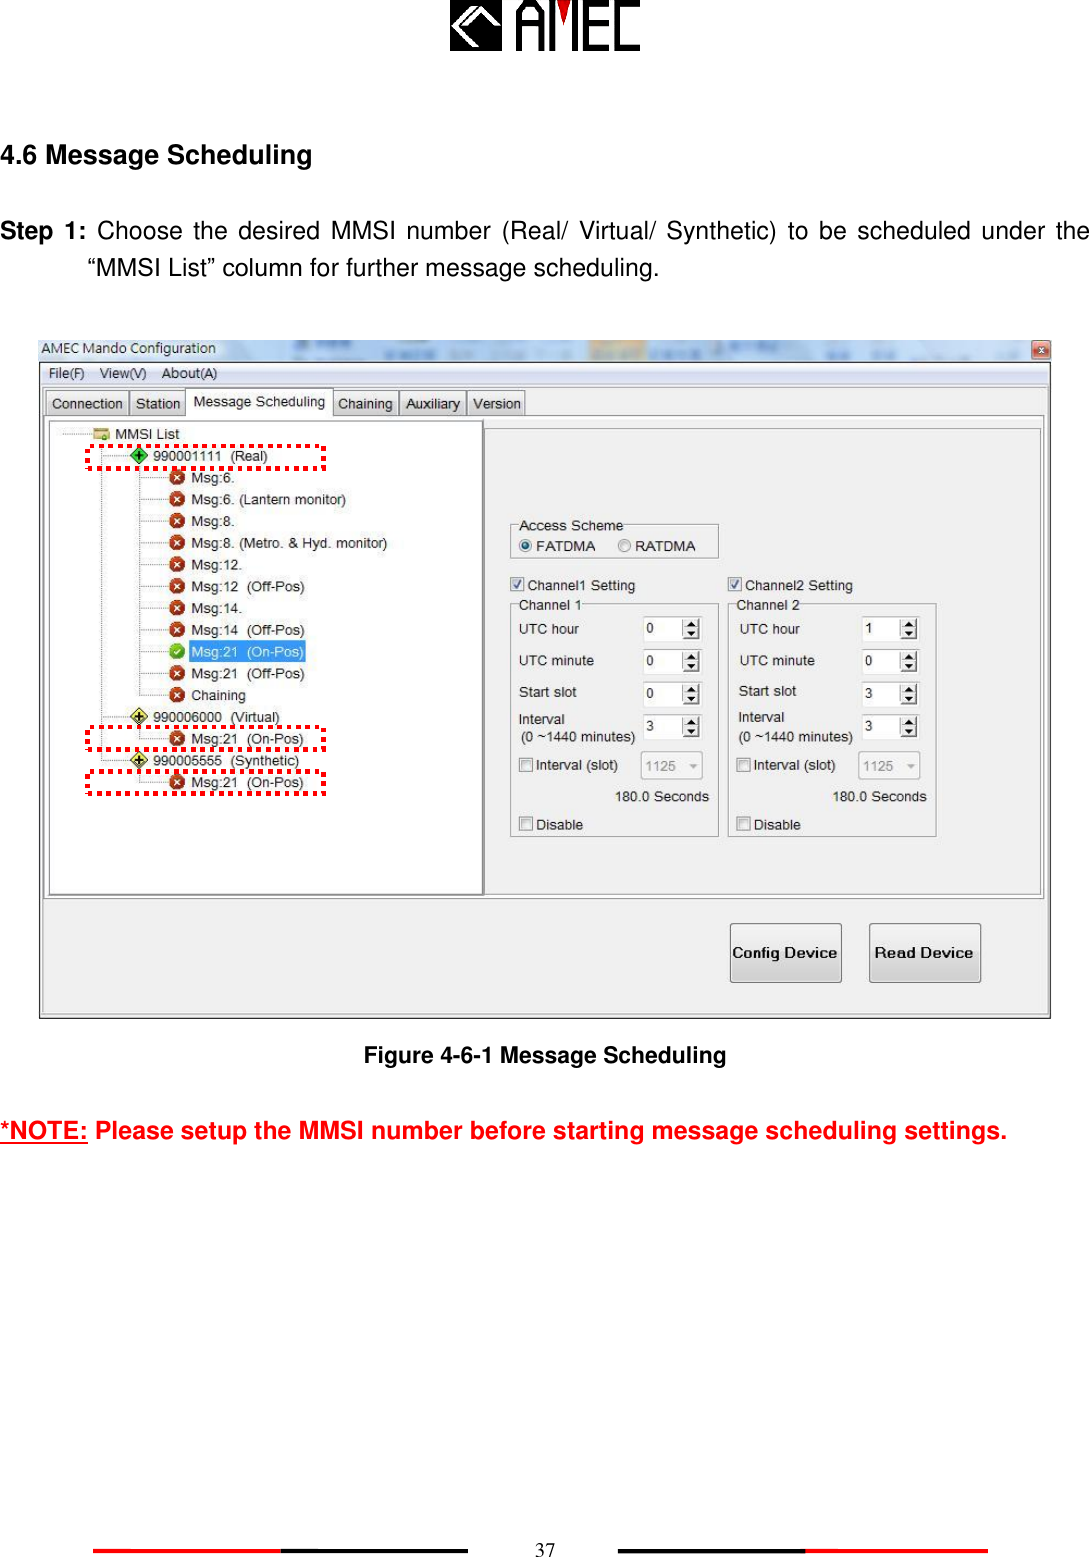    37 4.6 Message Scheduling Step 1: Choose the desired MMSI number (Real/ Virtual/ Synthetic) to be scheduled under the “MMSI List” column for further message scheduling.   Figure 4-6-1 Message Scheduling  *NOTE: Please setup the MMSI number before starting message scheduling settings. 